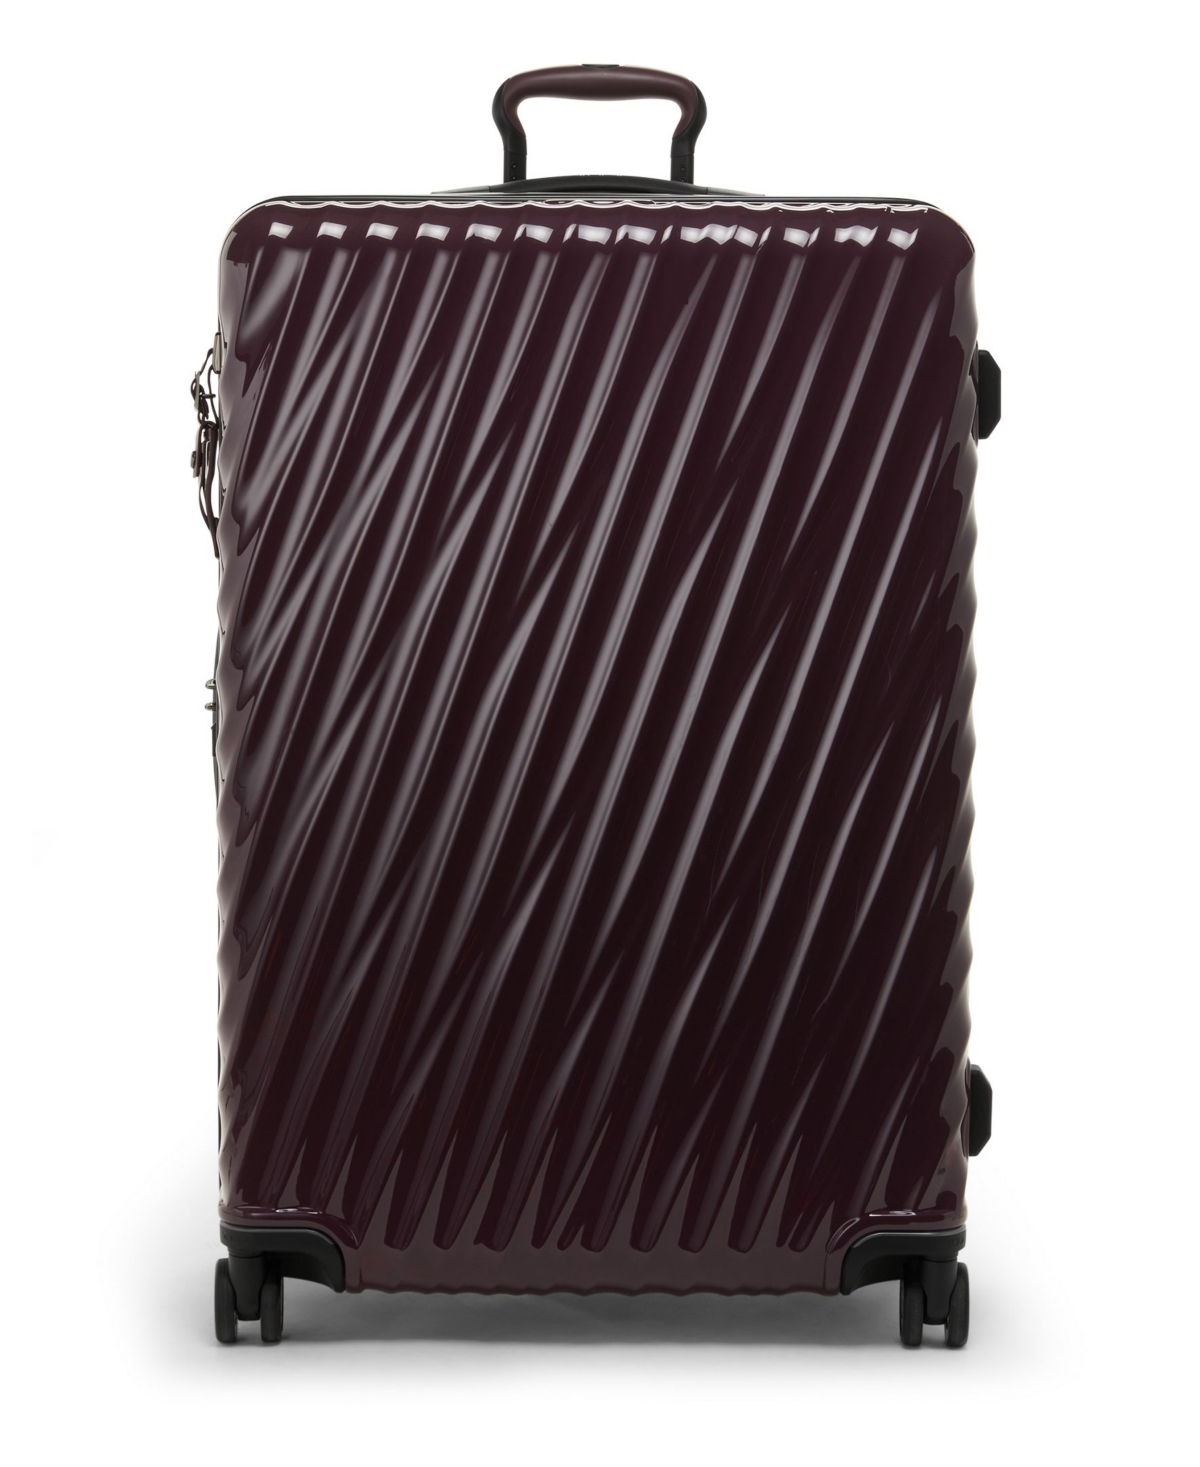 TUMI 19 DEGREE EXTENDED TRIP EXPANDABLE 4 WHEELED PACKING CASE